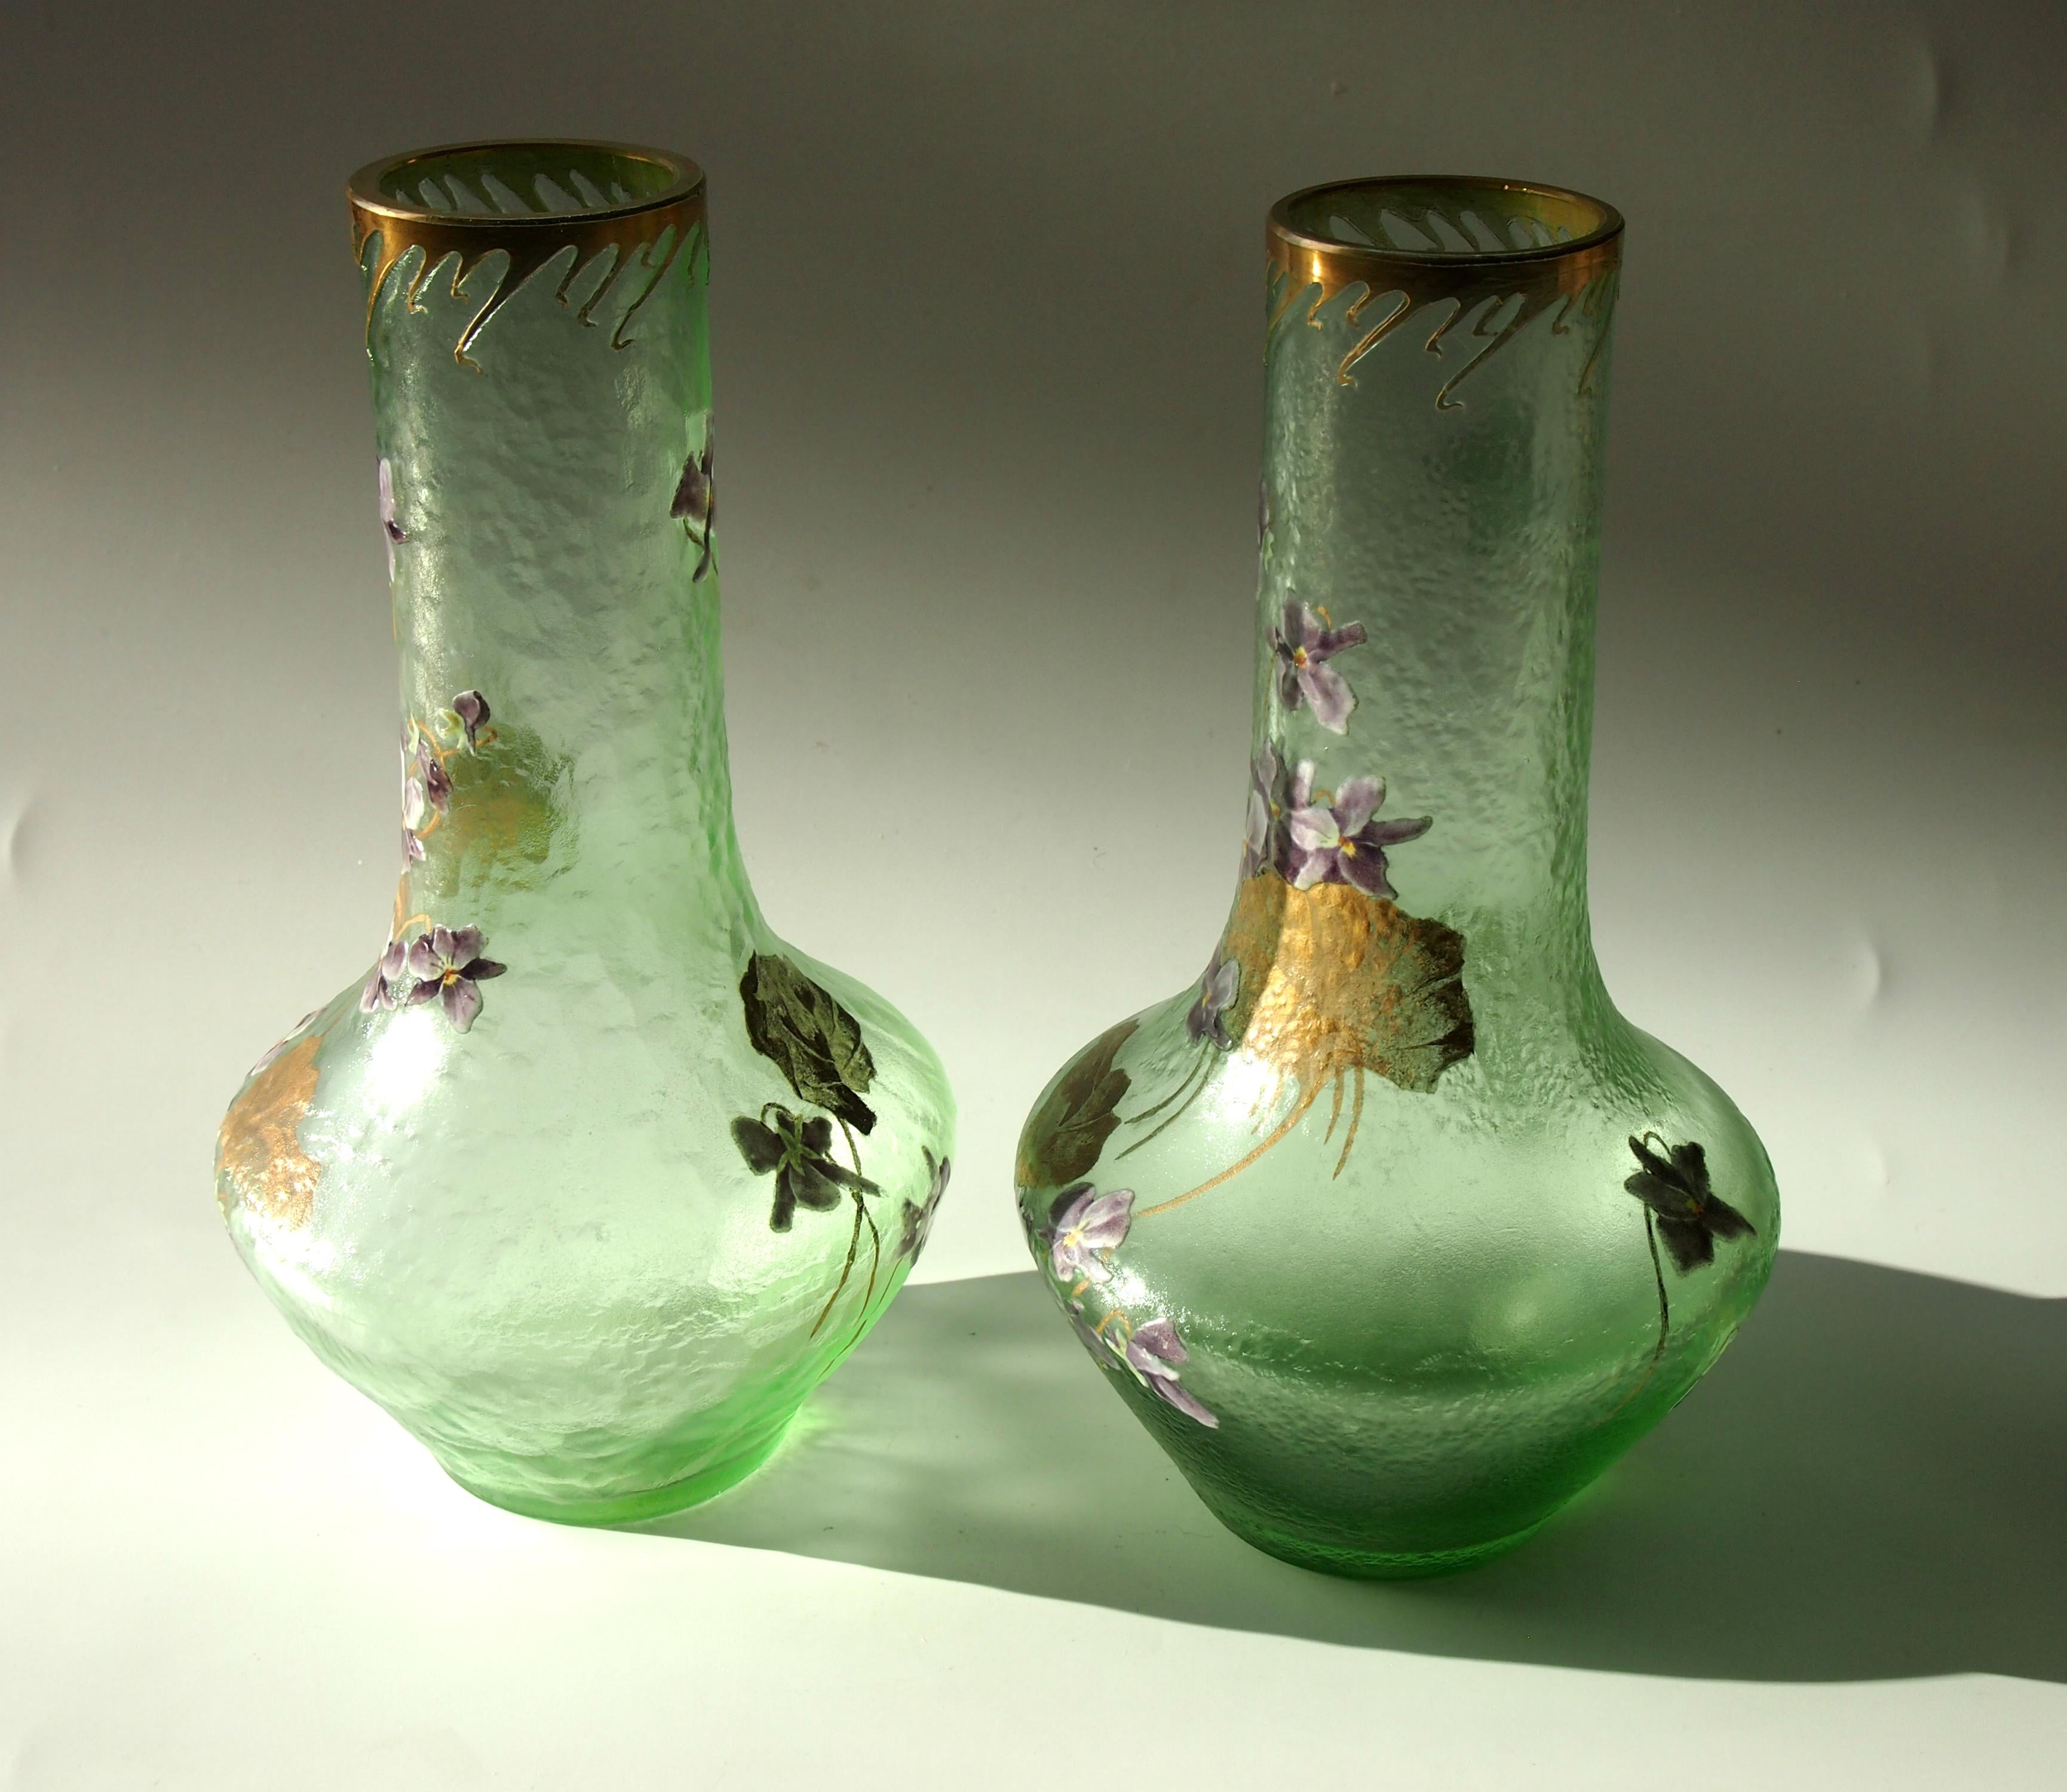 French Art Nouveau Legras Pair of Acid Cut Back Violets Glass Vases, circa 1898 In Good Condition For Sale In London, GB